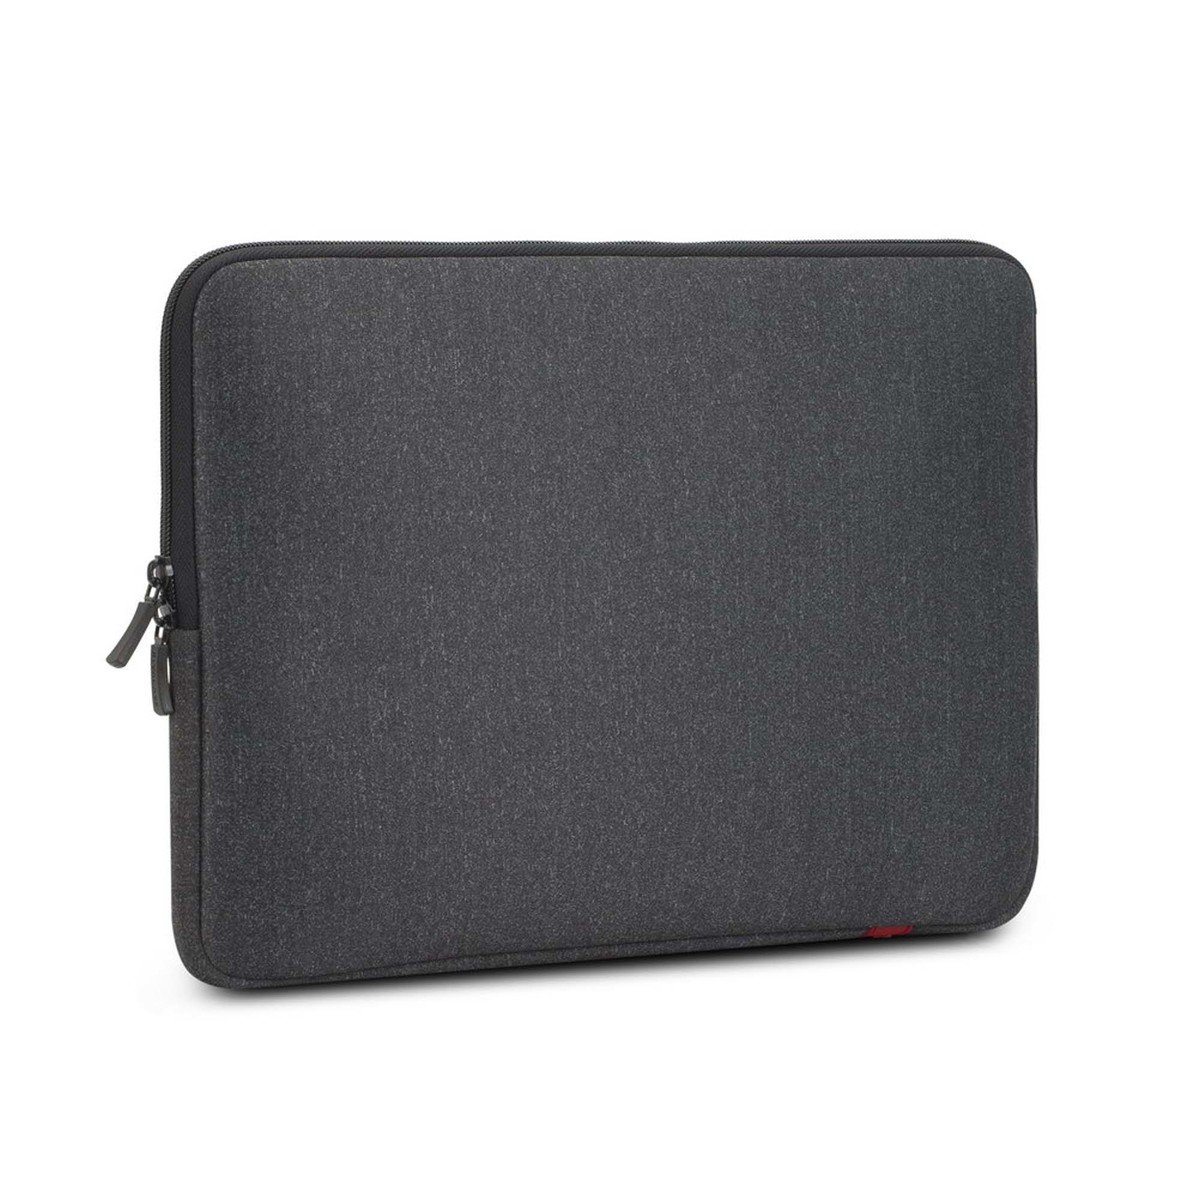 Rivacase Mcbook Case5133 15.4 inch D/Gy